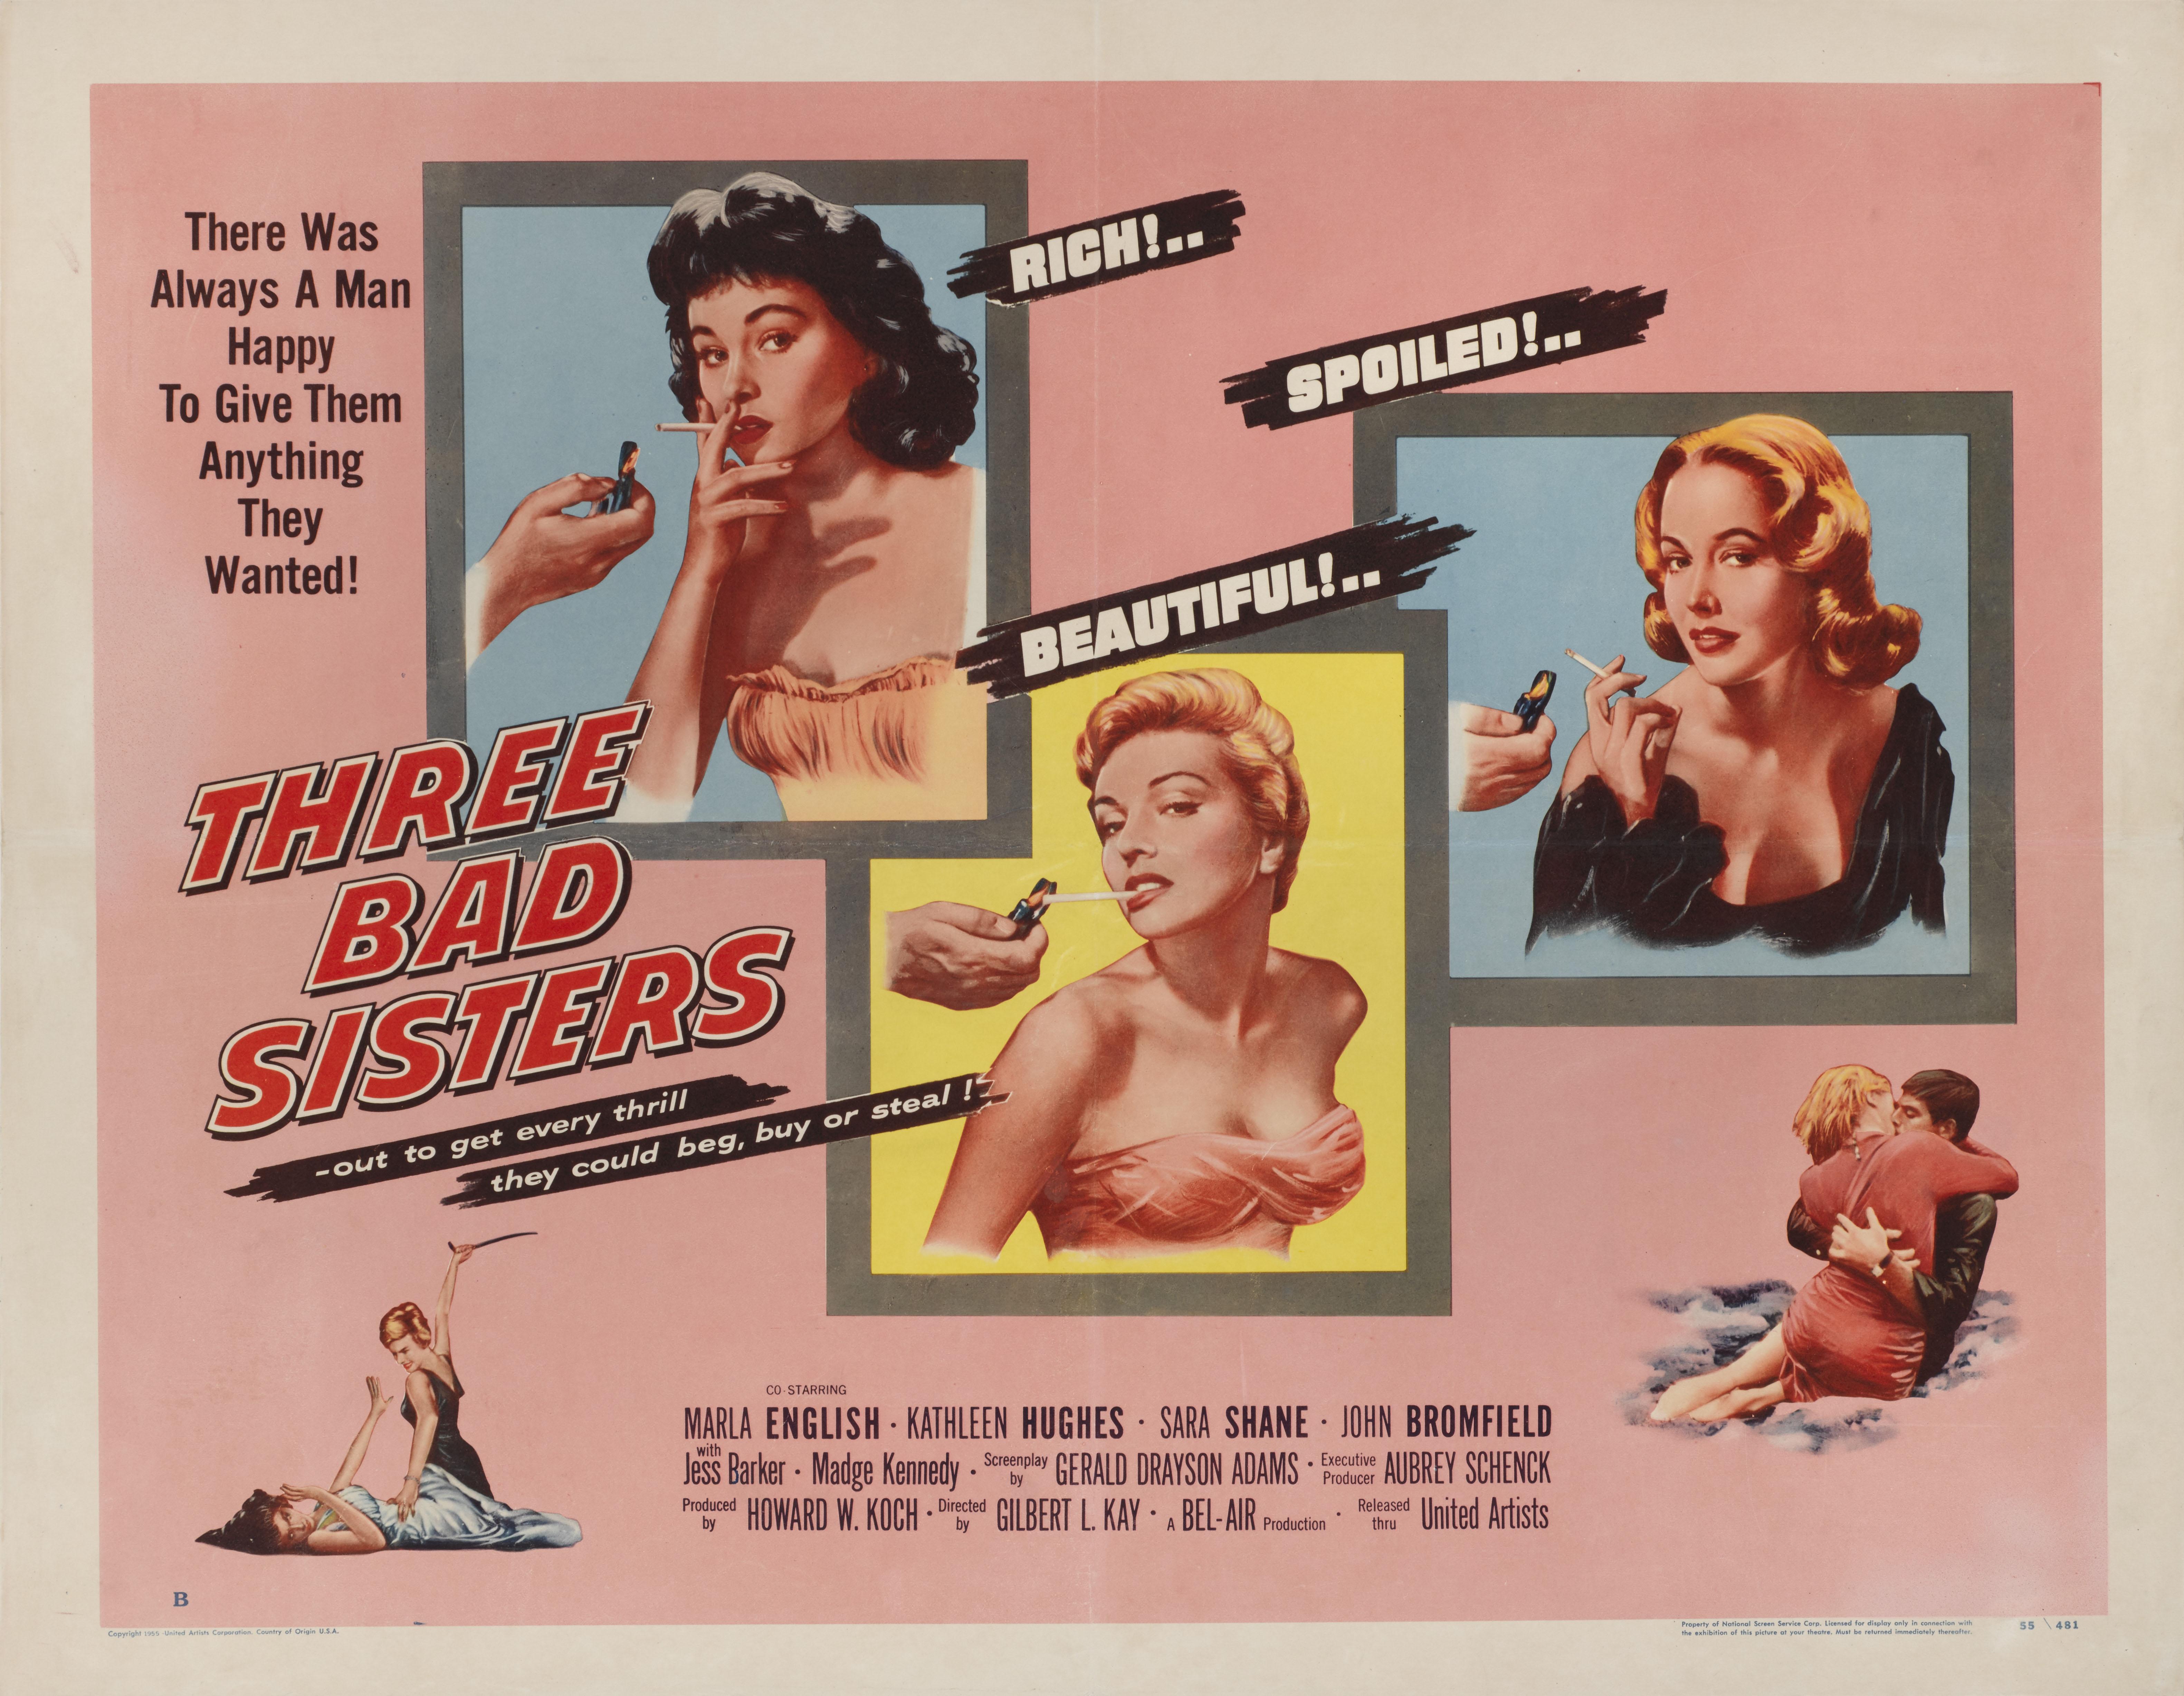 Original US style B film poster for the 1956 Exploitation drama starring Marla English, Kathleen Hughes and Sara Shane. This film was directed by Gilbert Kay.
This poster is conservation paper backed.